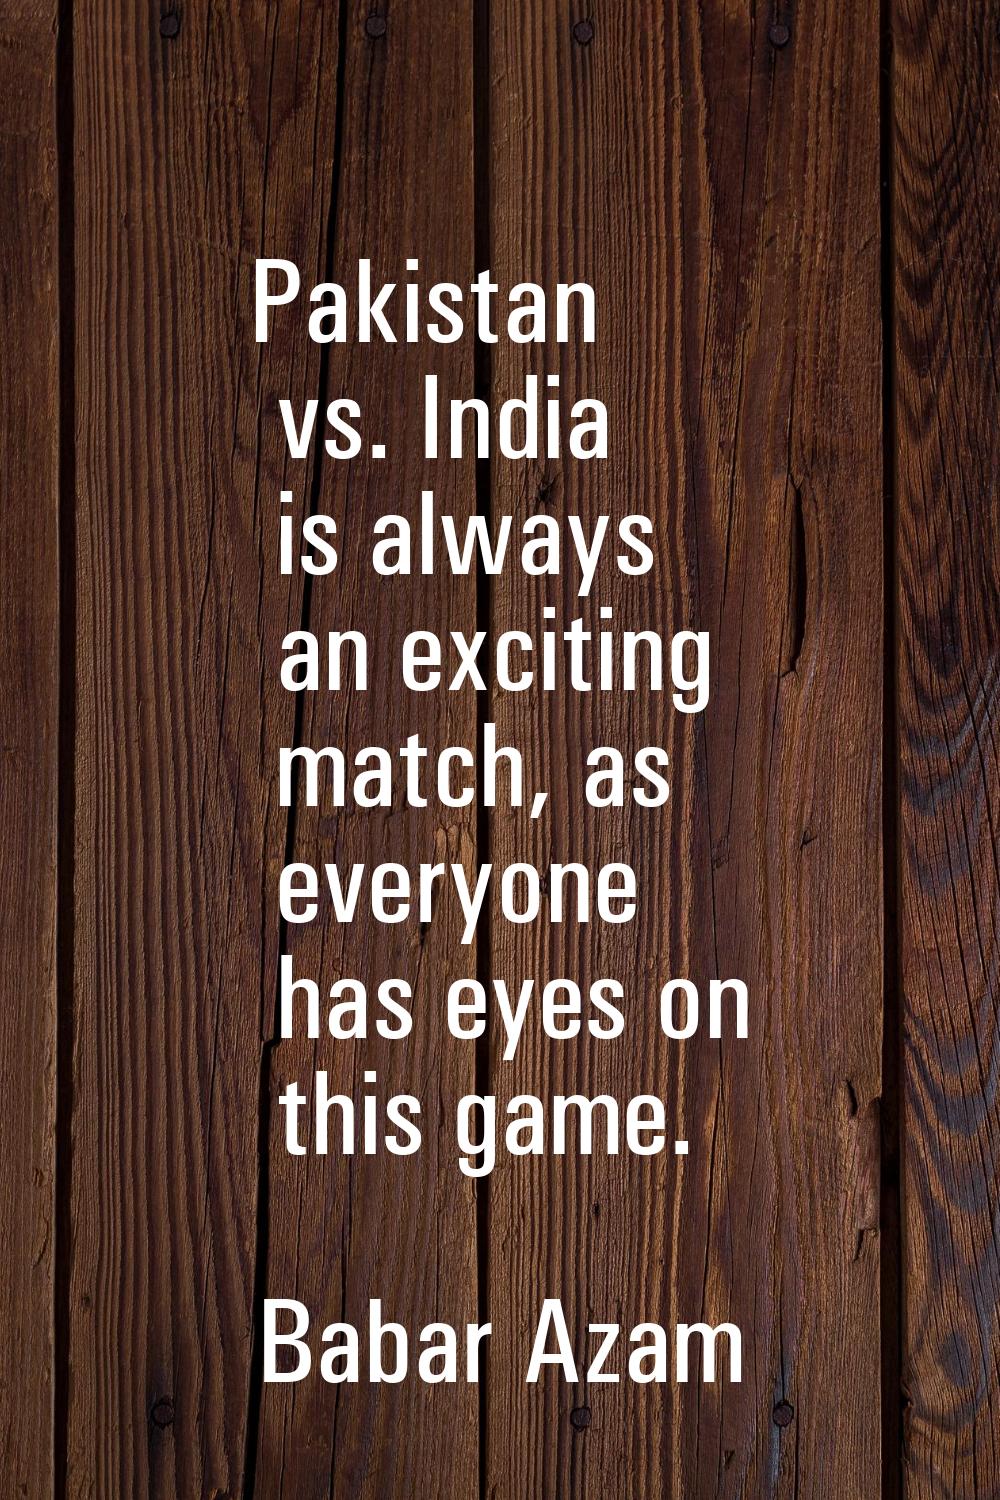 Pakistan vs. India is always an exciting match, as everyone has eyes on this game.